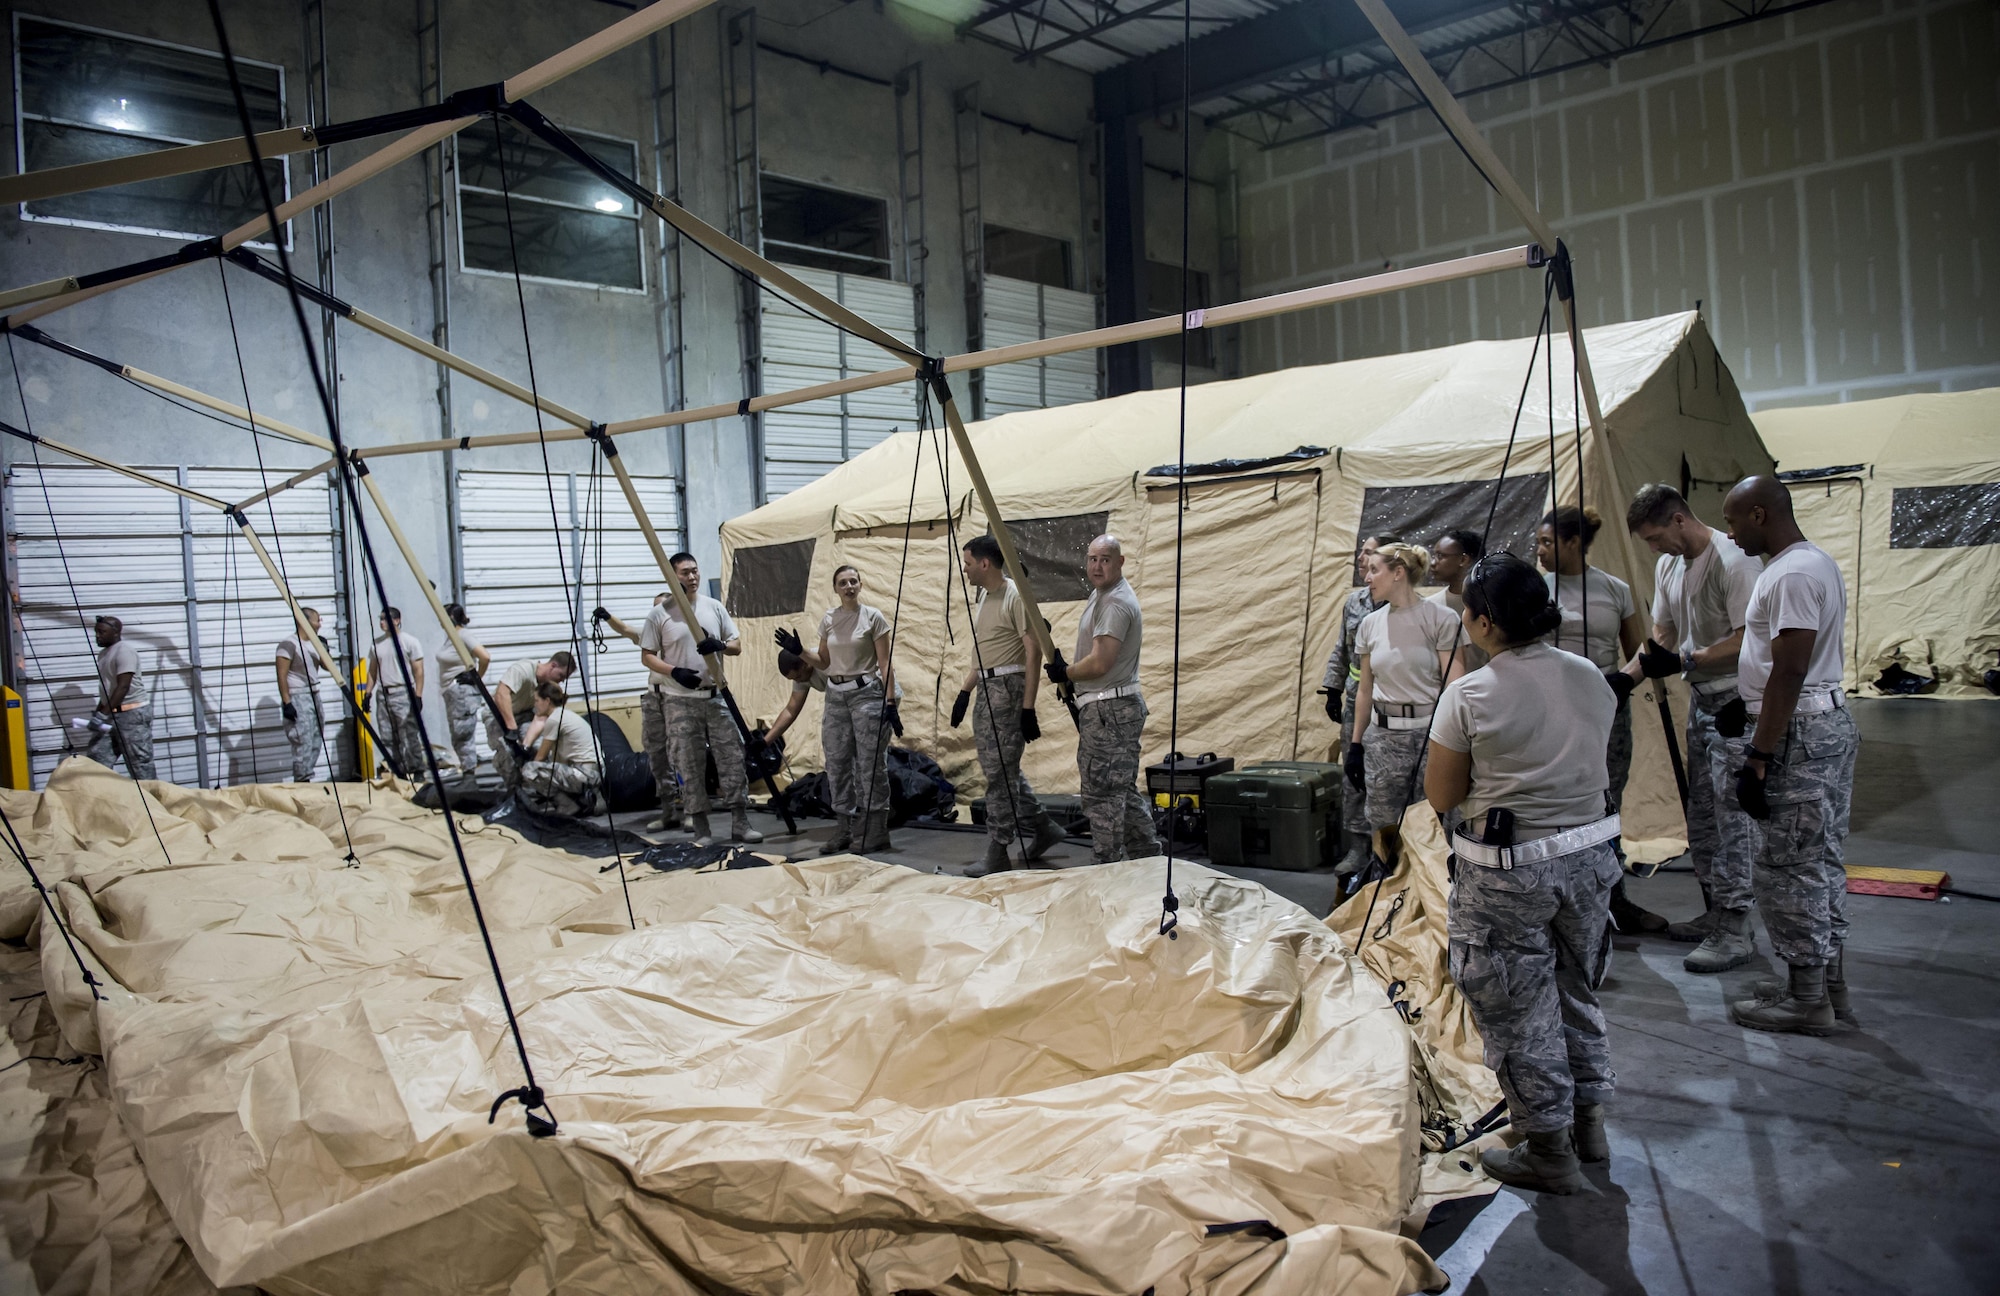 Personnel from the 59th Medical Wing, Joint Base San Antonio-Lackland, Texas, set up a medical tent inside a hangar at the George Bush Intercontinental Airport in Houston, Texas, during relief efforts following the devastation caused by Hurricane Harvey, August 30, 2017. The 59th MDW is part of a larger Department of Defense presence in an effort to aid eastern Texas following a record amount of rainfall and flooding. (U.S. Air Force photo/Senior Airman Keifer Bowes)